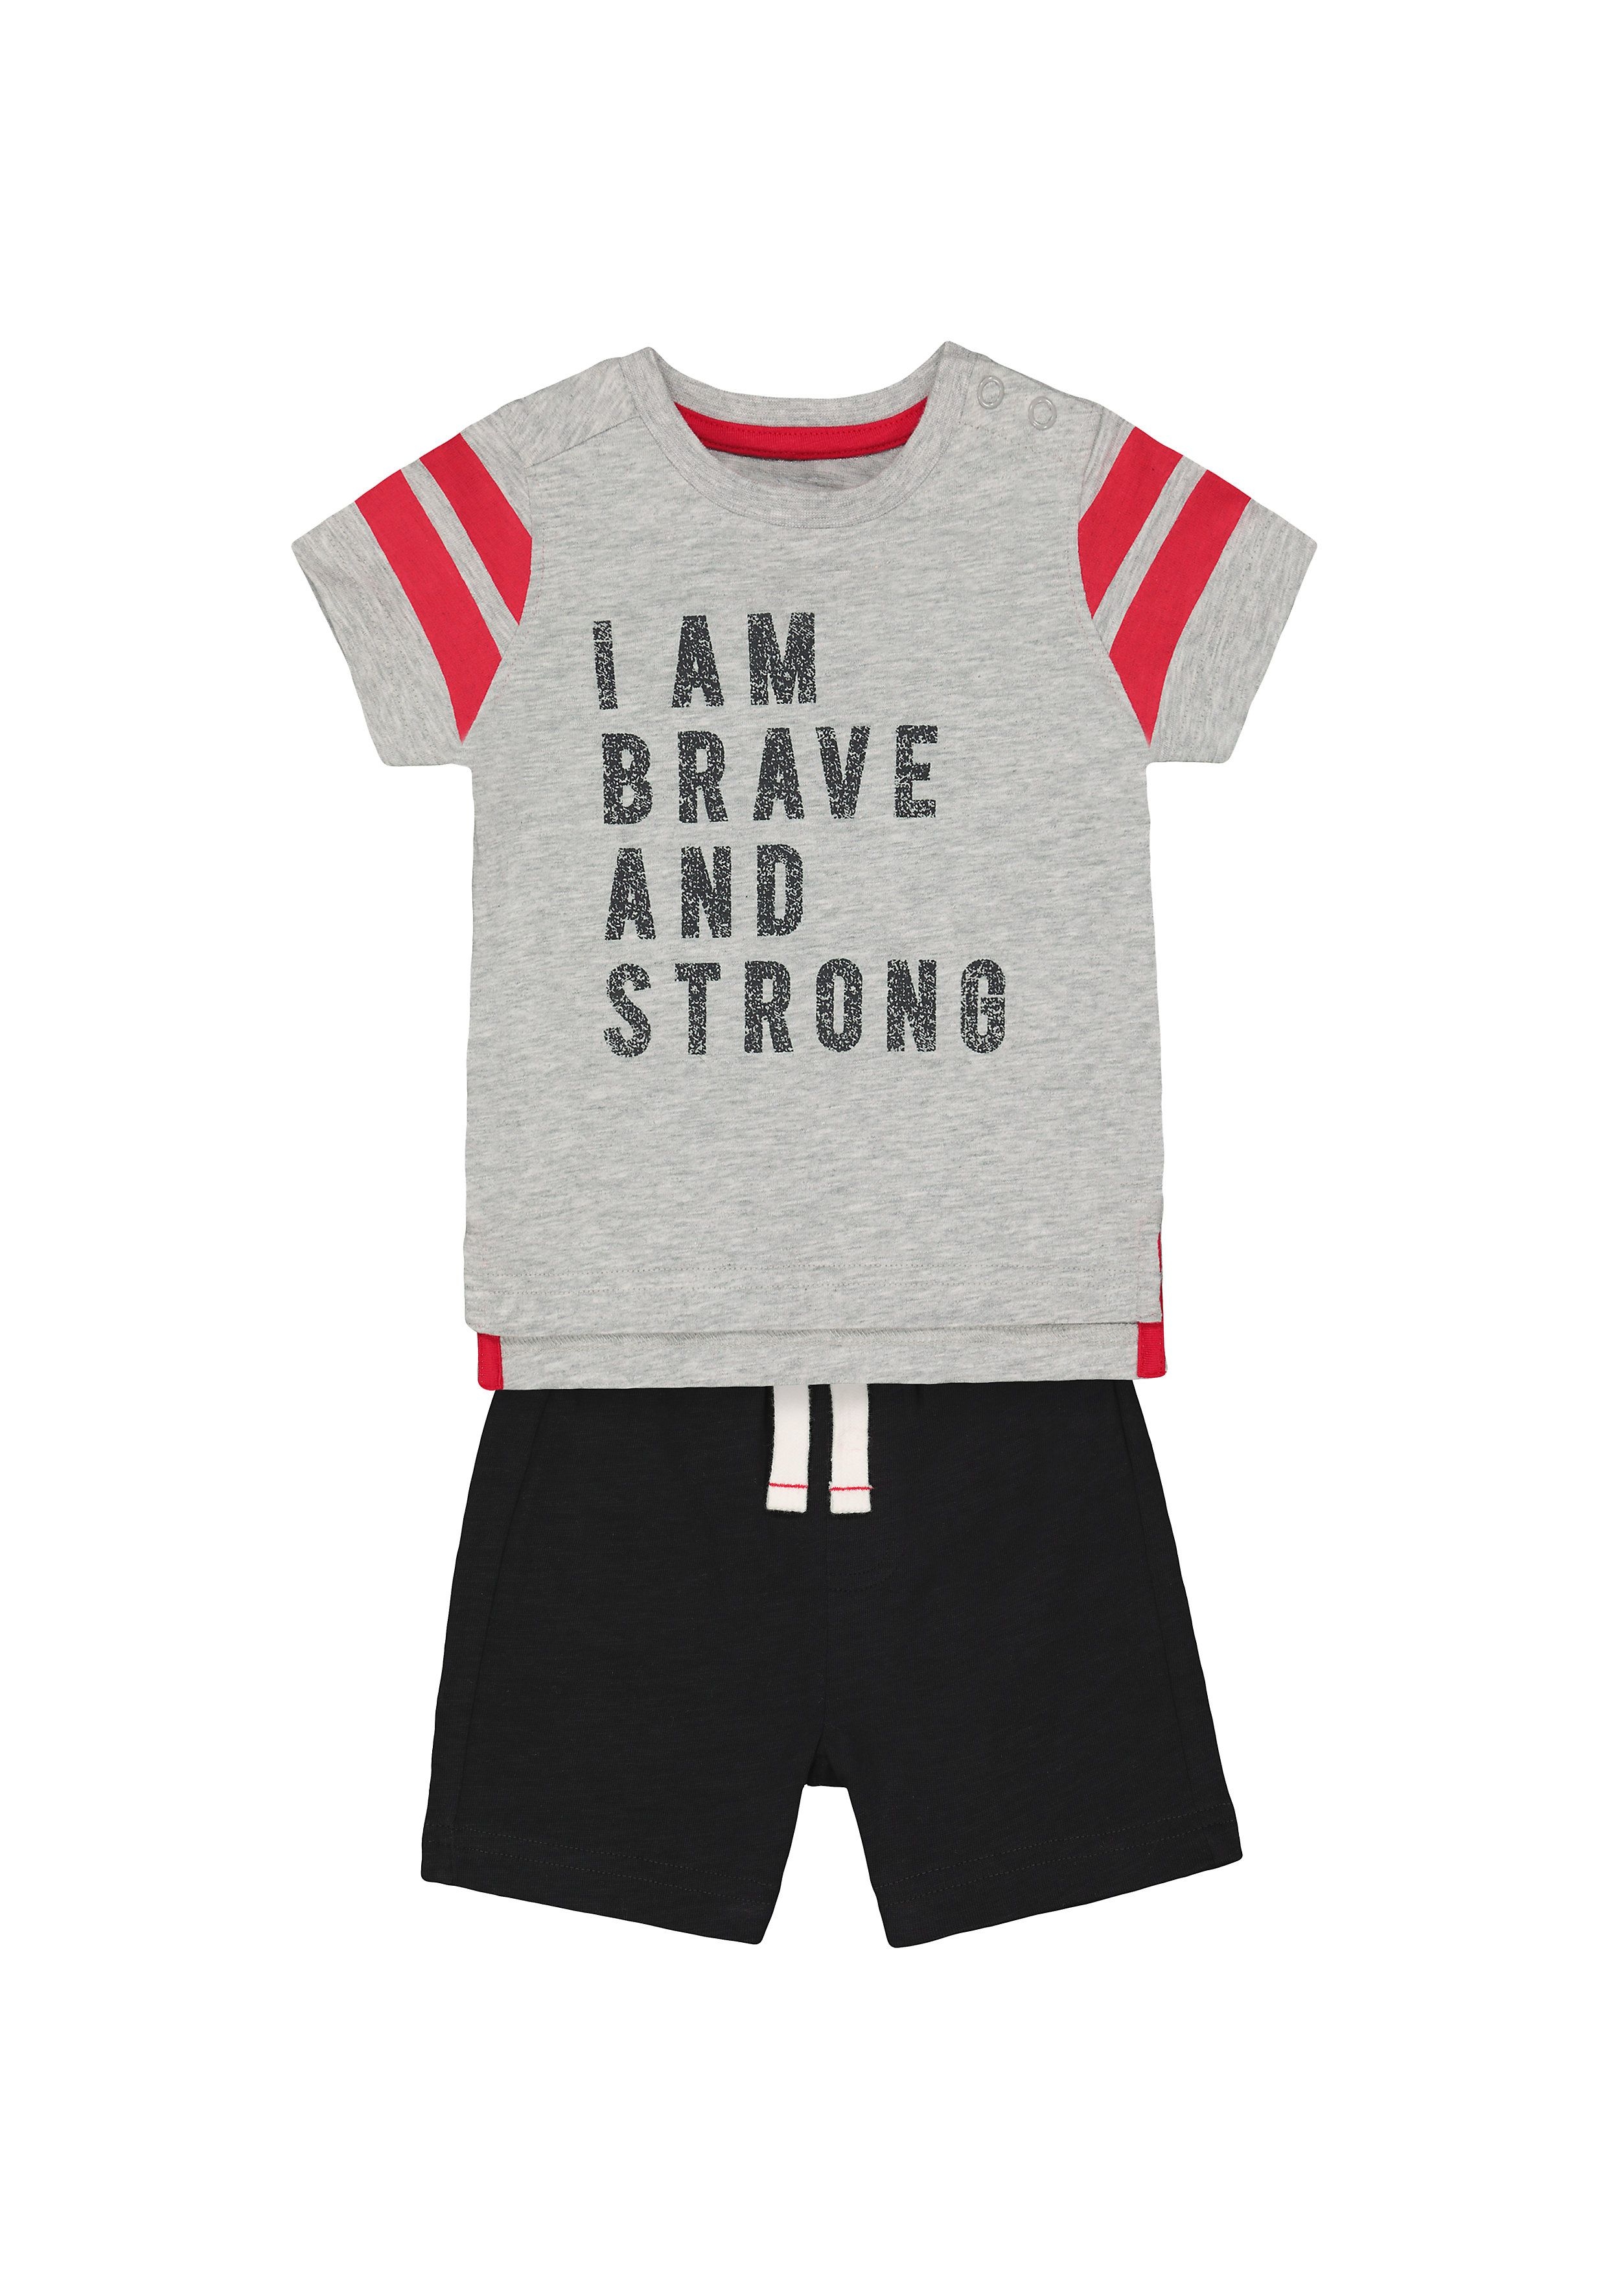 Brave and Strong T-Shirt and Shorts Set